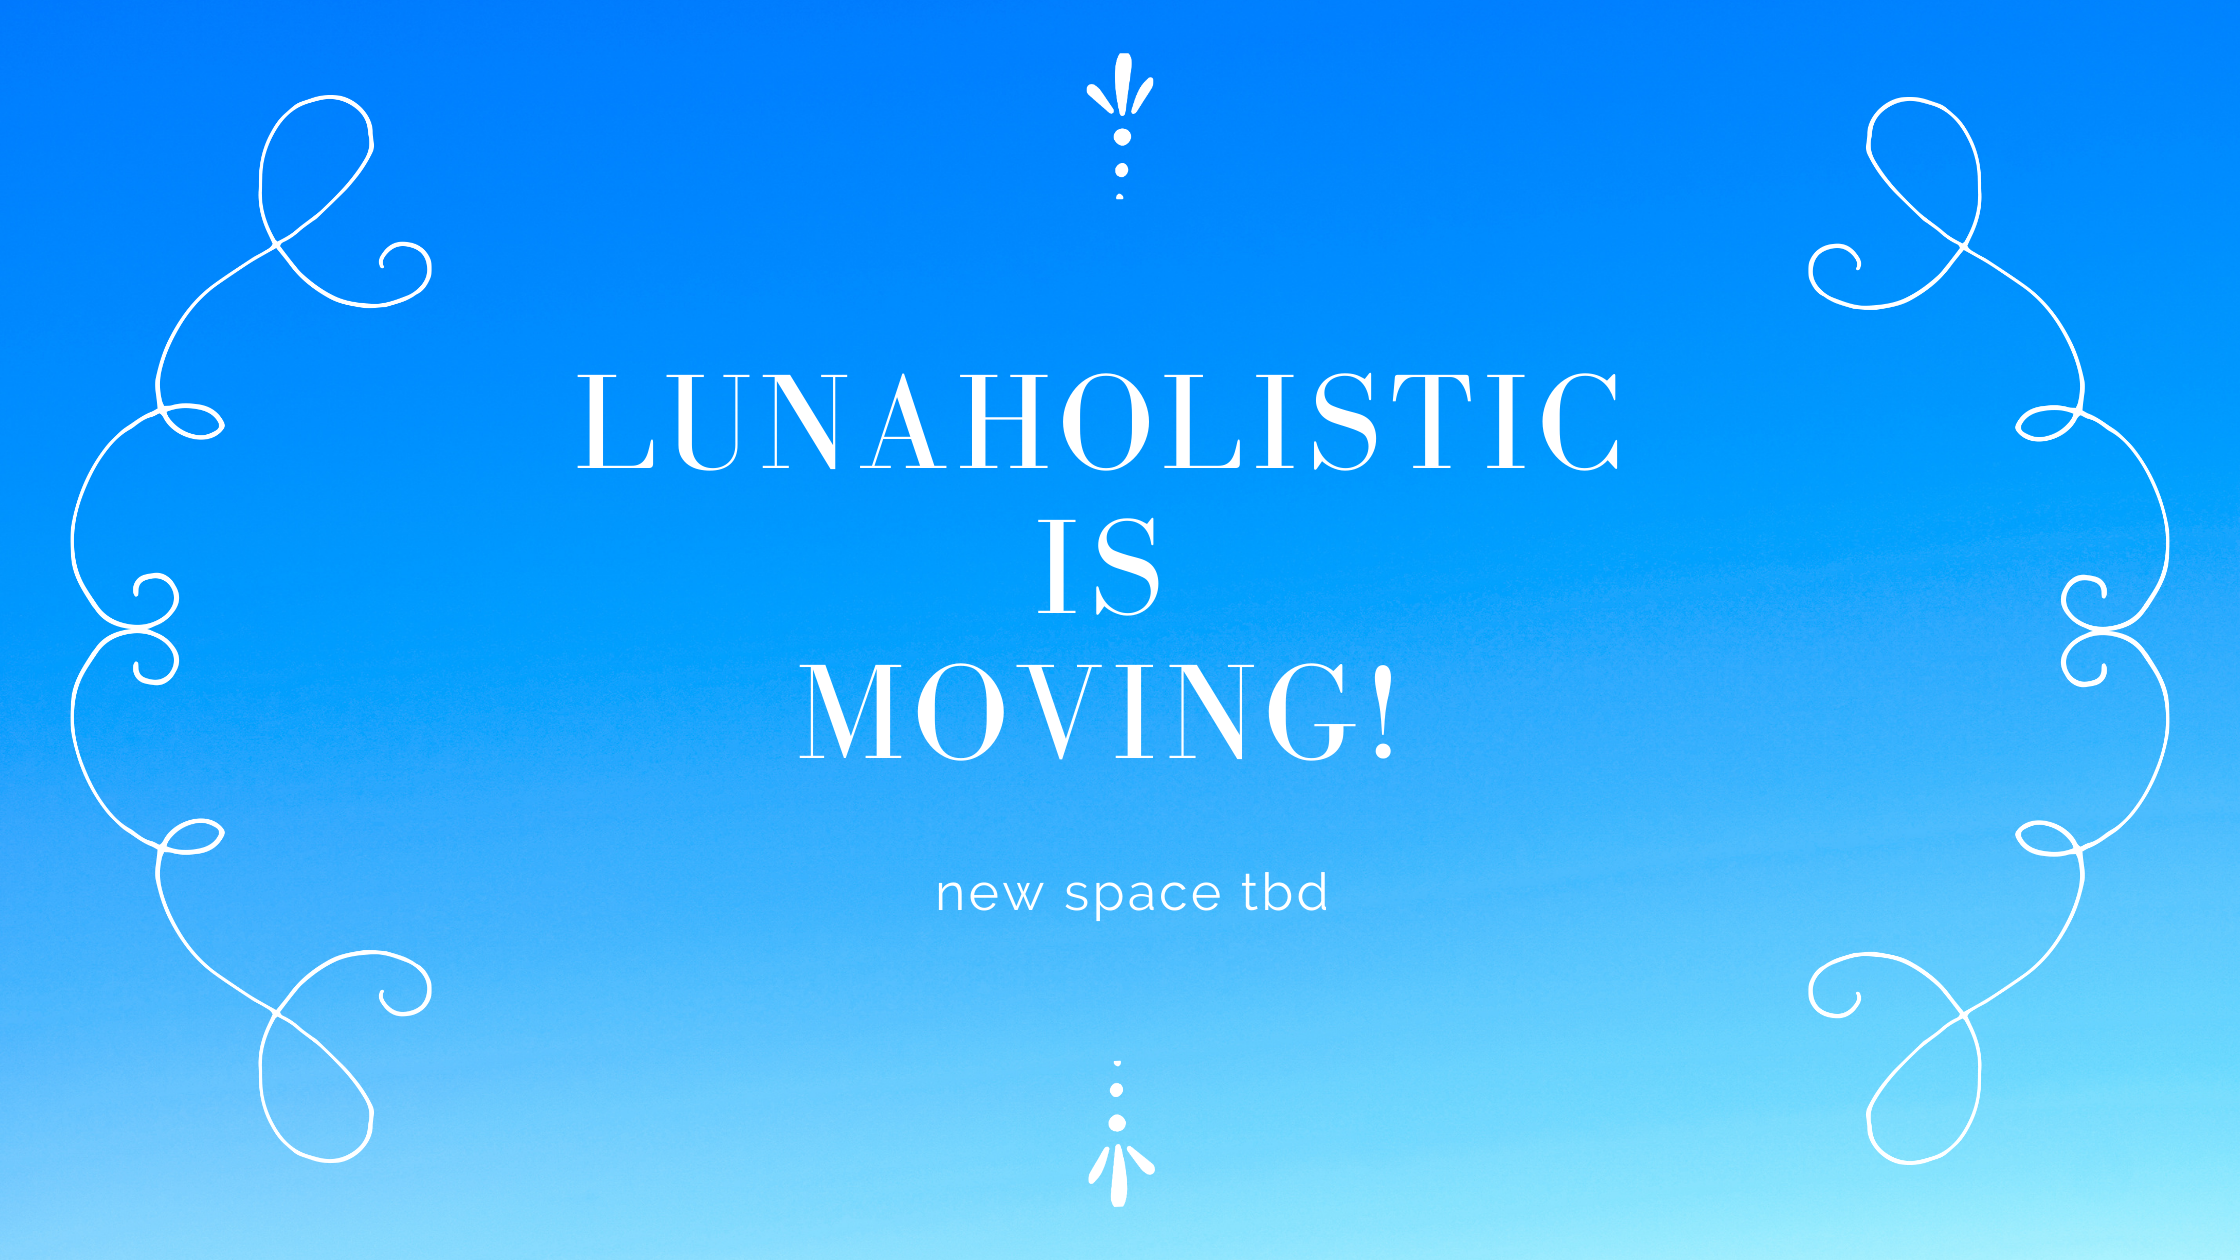 LunaHolistic is Moving - new space tbd